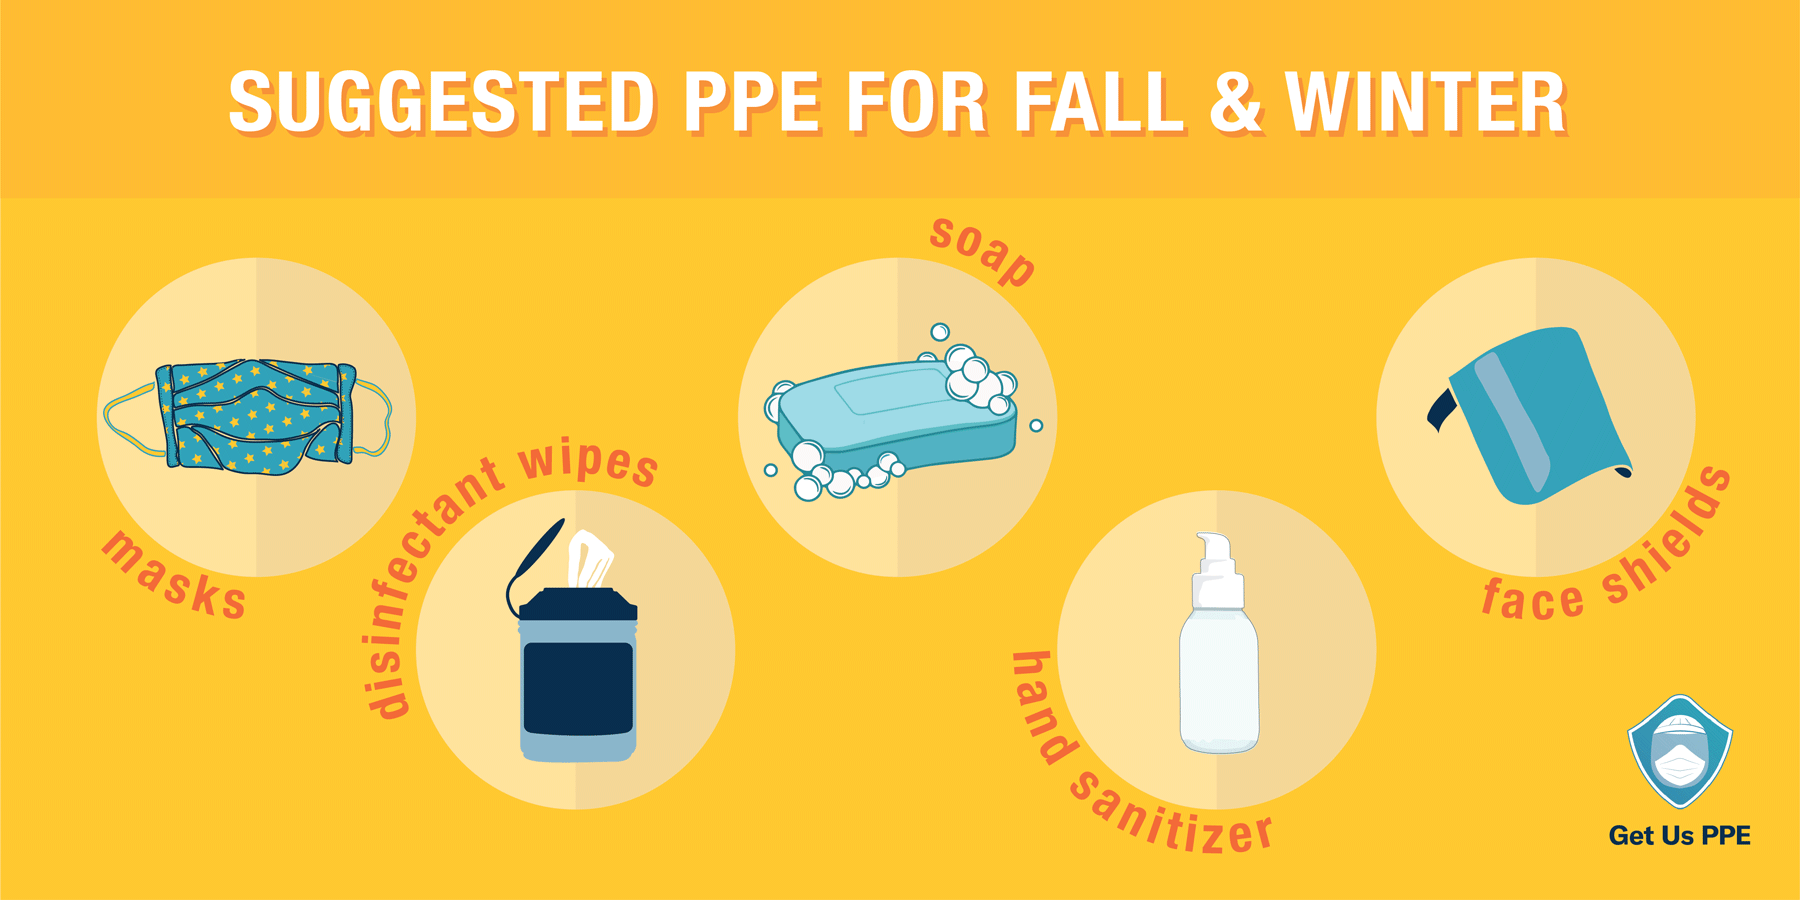 Suggested PPE for fall and winter: masks, disinfectant wipes, soap, hand sanitizer, face shields